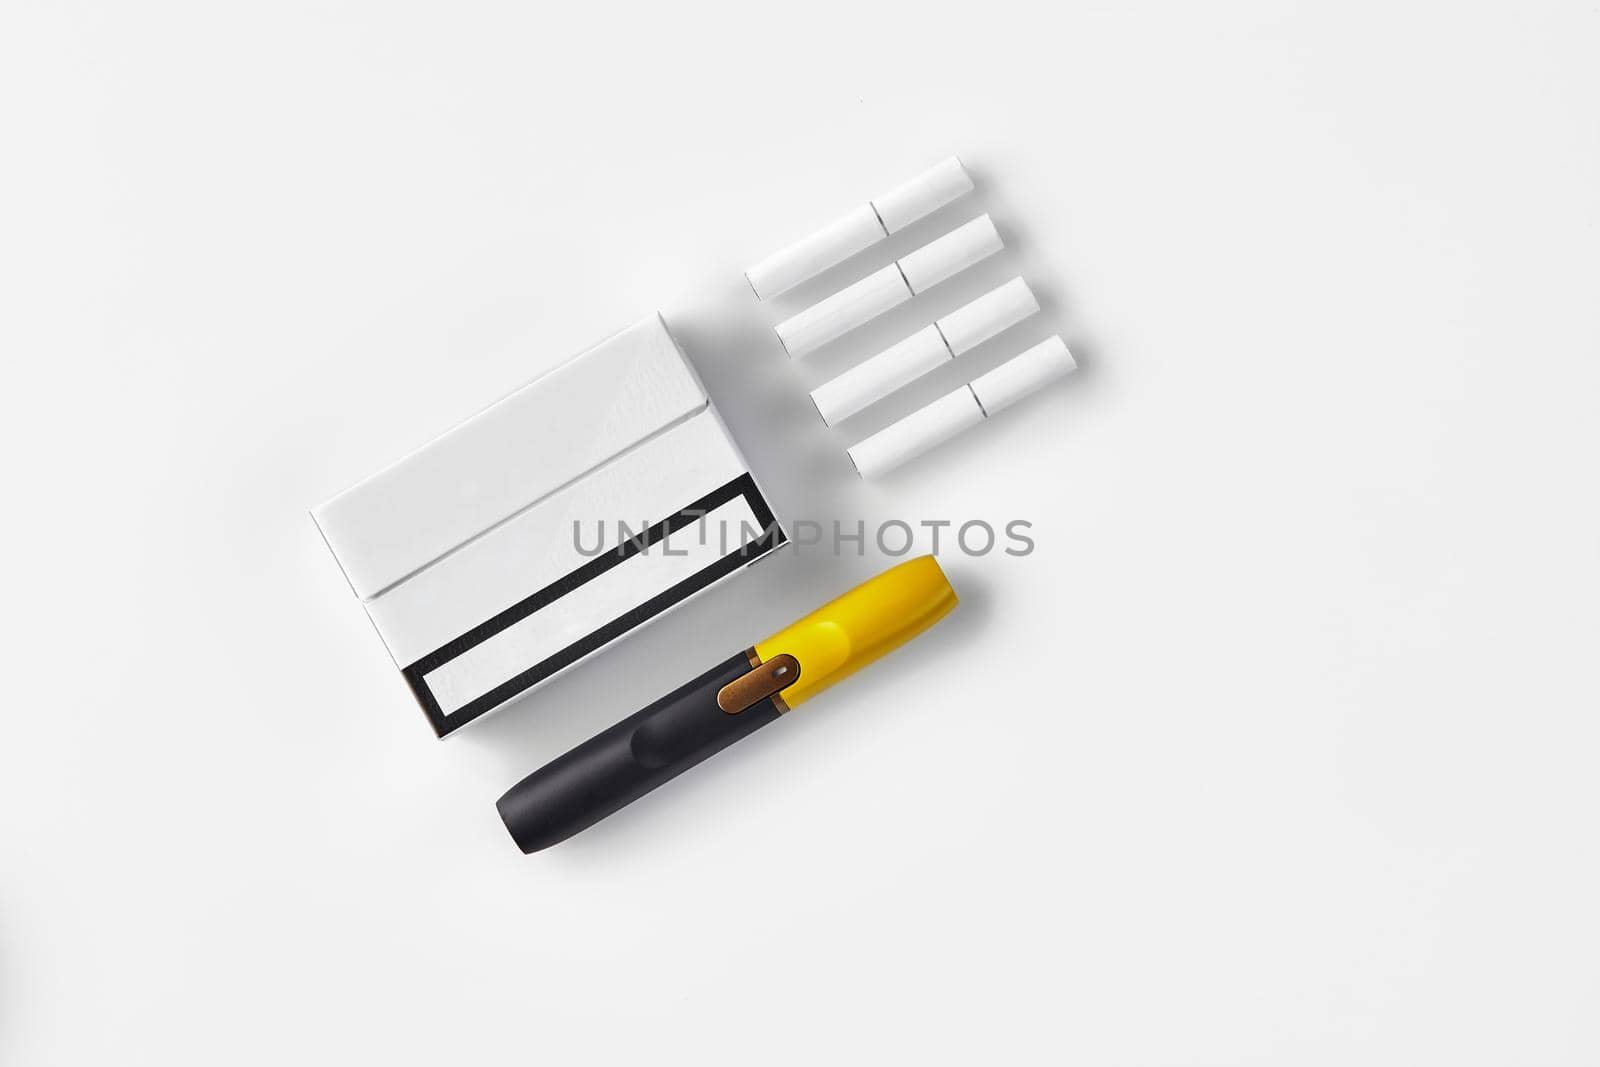 New generation black and yellow electronic cigarette, one pack and four heatsticks, isolated on white. Alternative technology. Heating tobacco system. Template place for your text. Close up, flat lay